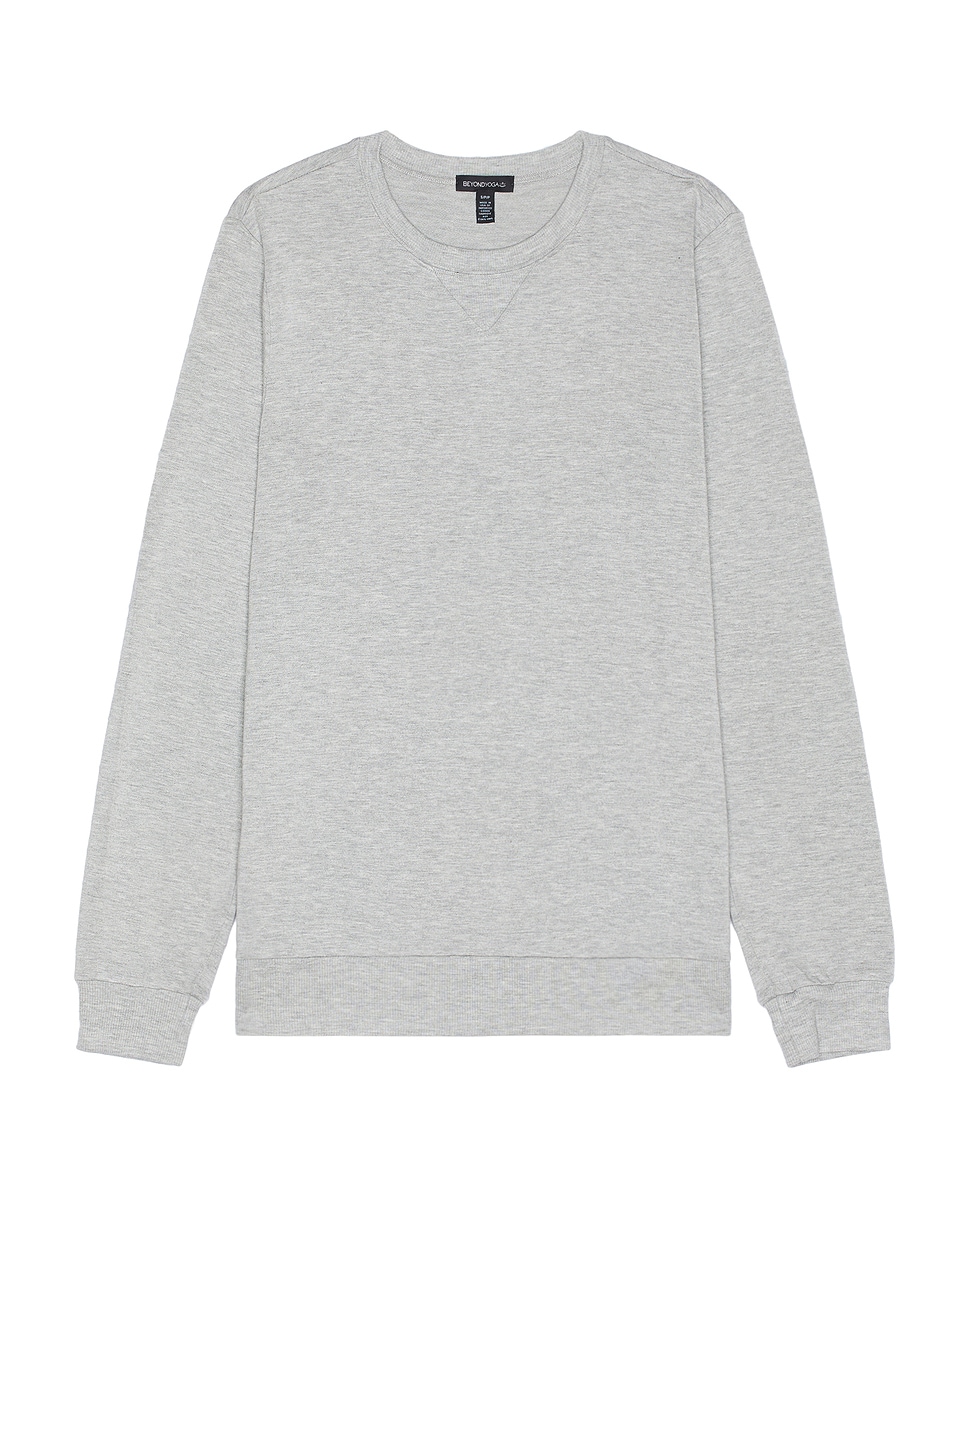 Image 1 of Beyond Yoga Always Beyond Pullover Crew in Light Grey Heather